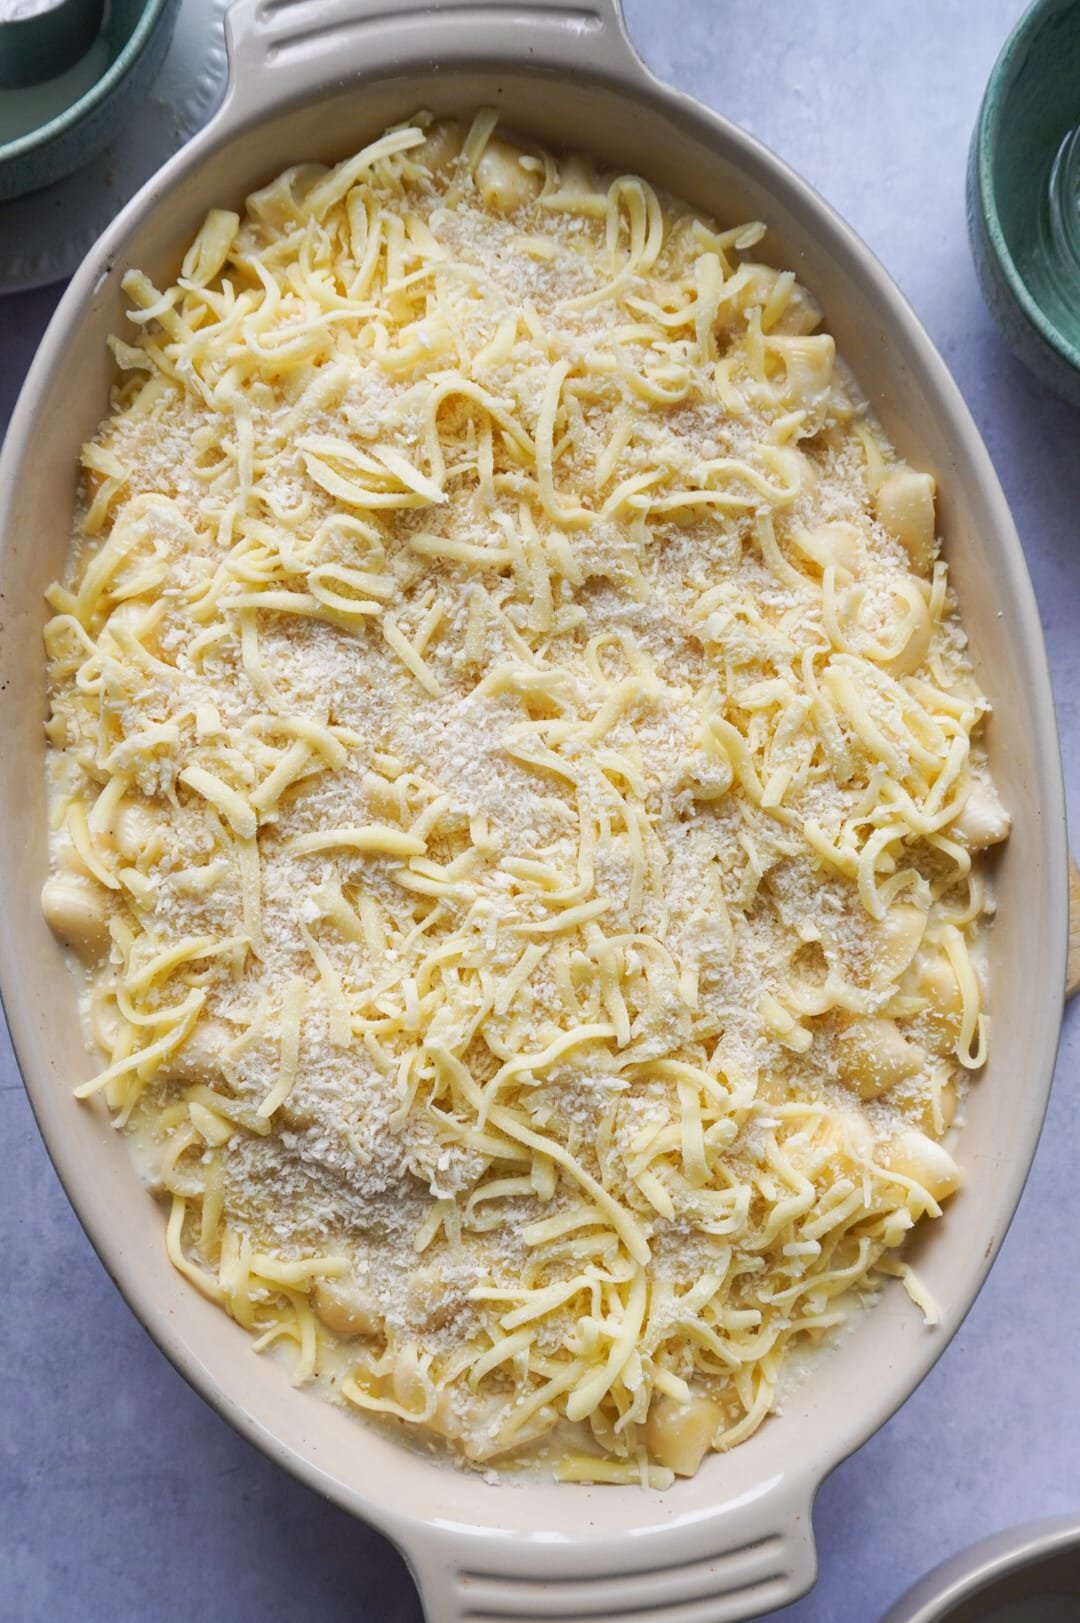 Transfer into a 27cm wide Le Creuset oval oven dish and top with an extra cup of mozzarella and panko crumbs to make your One Pot Super Simple Mac and Cheese.